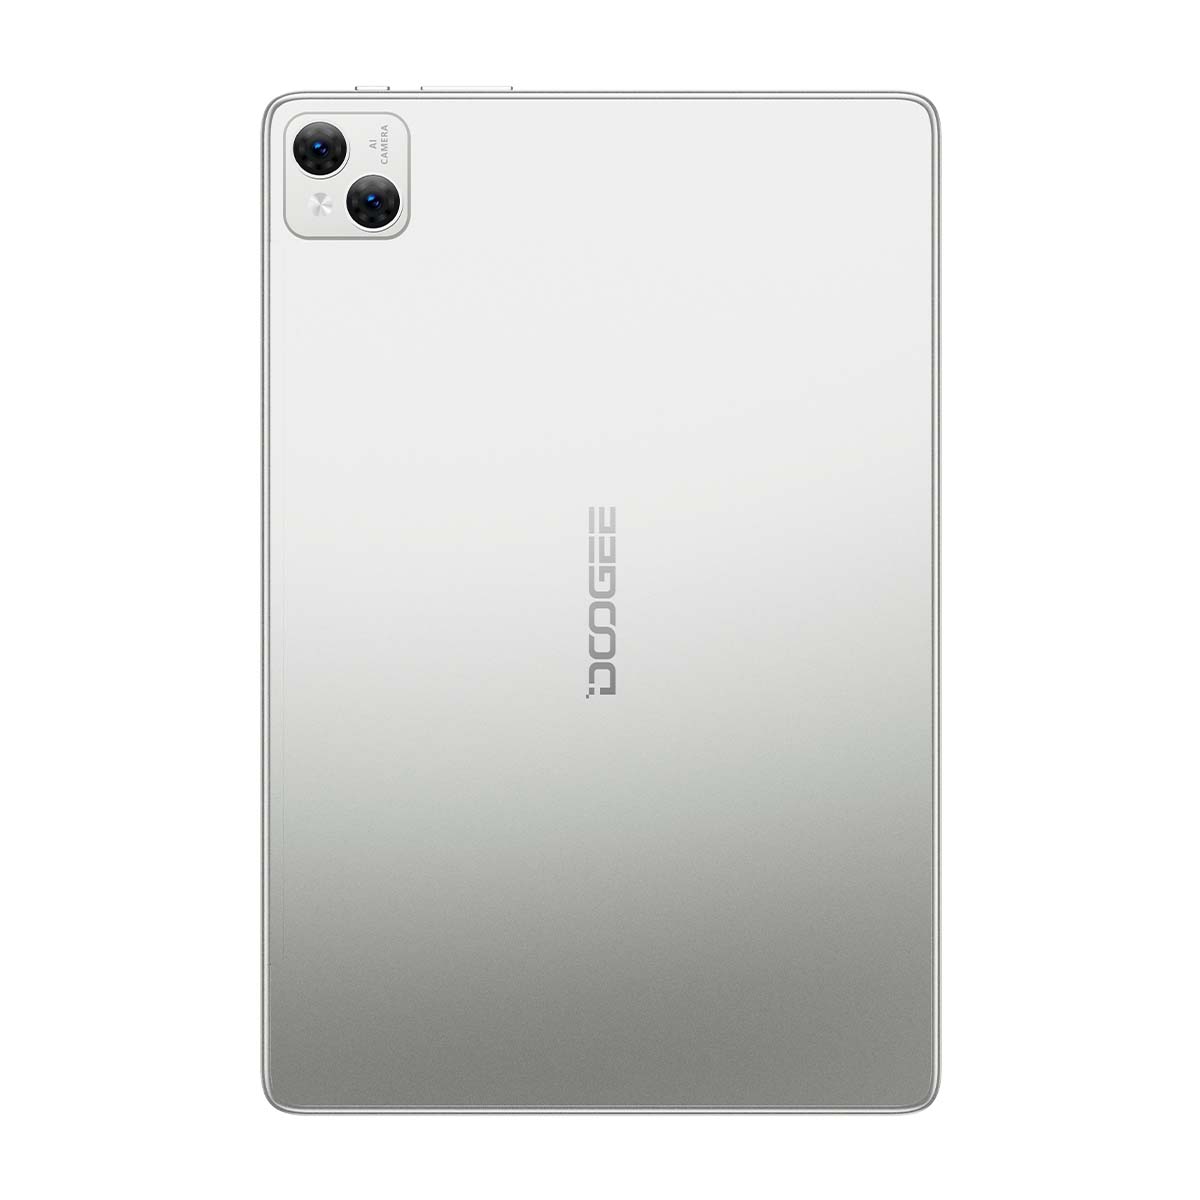 DOOGEE T10 4G Ultimate Tablet PC 10.1 Inch FHD+ Fullview Display 8GB RAN 128GB ROM 8300mAh Battery